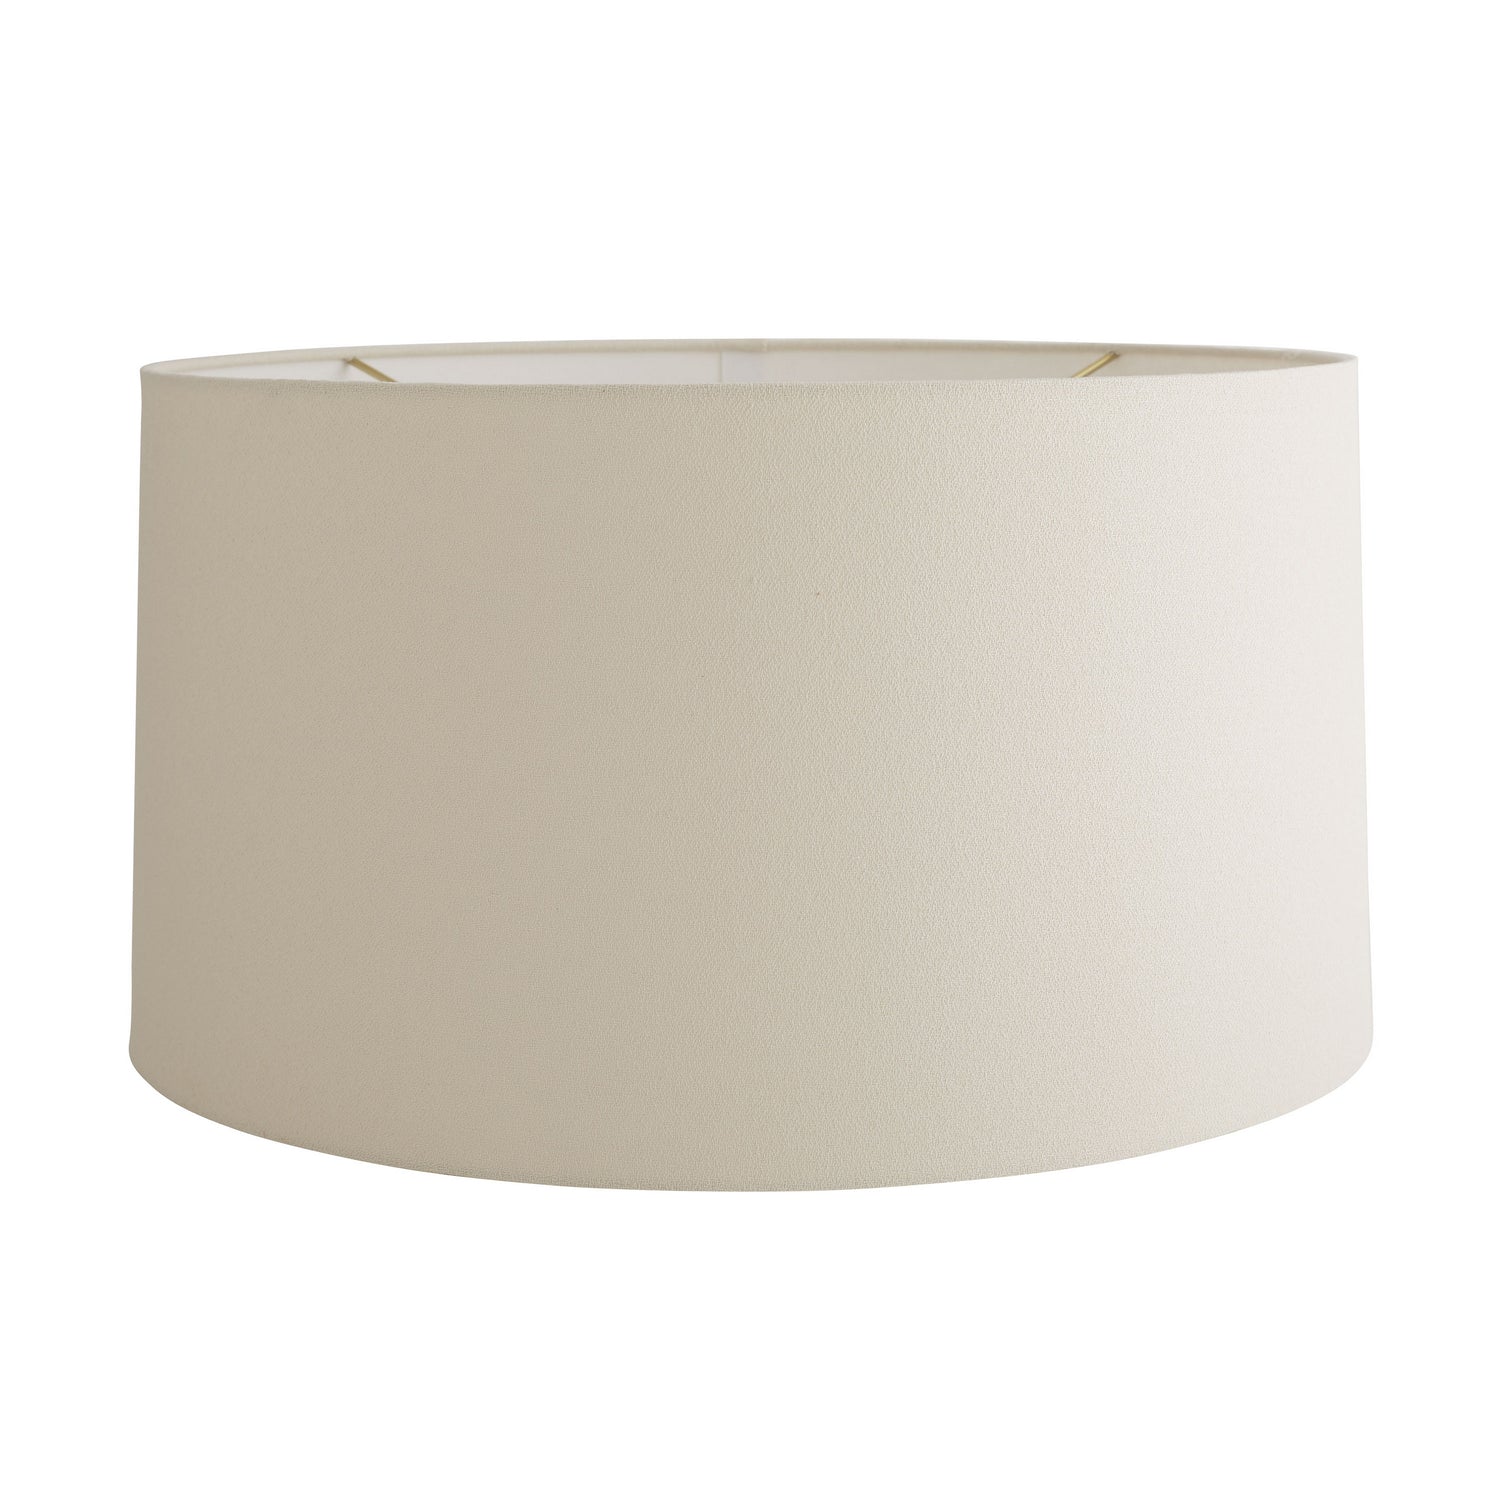 One Light Table Lamp from the Frio collection in White finish